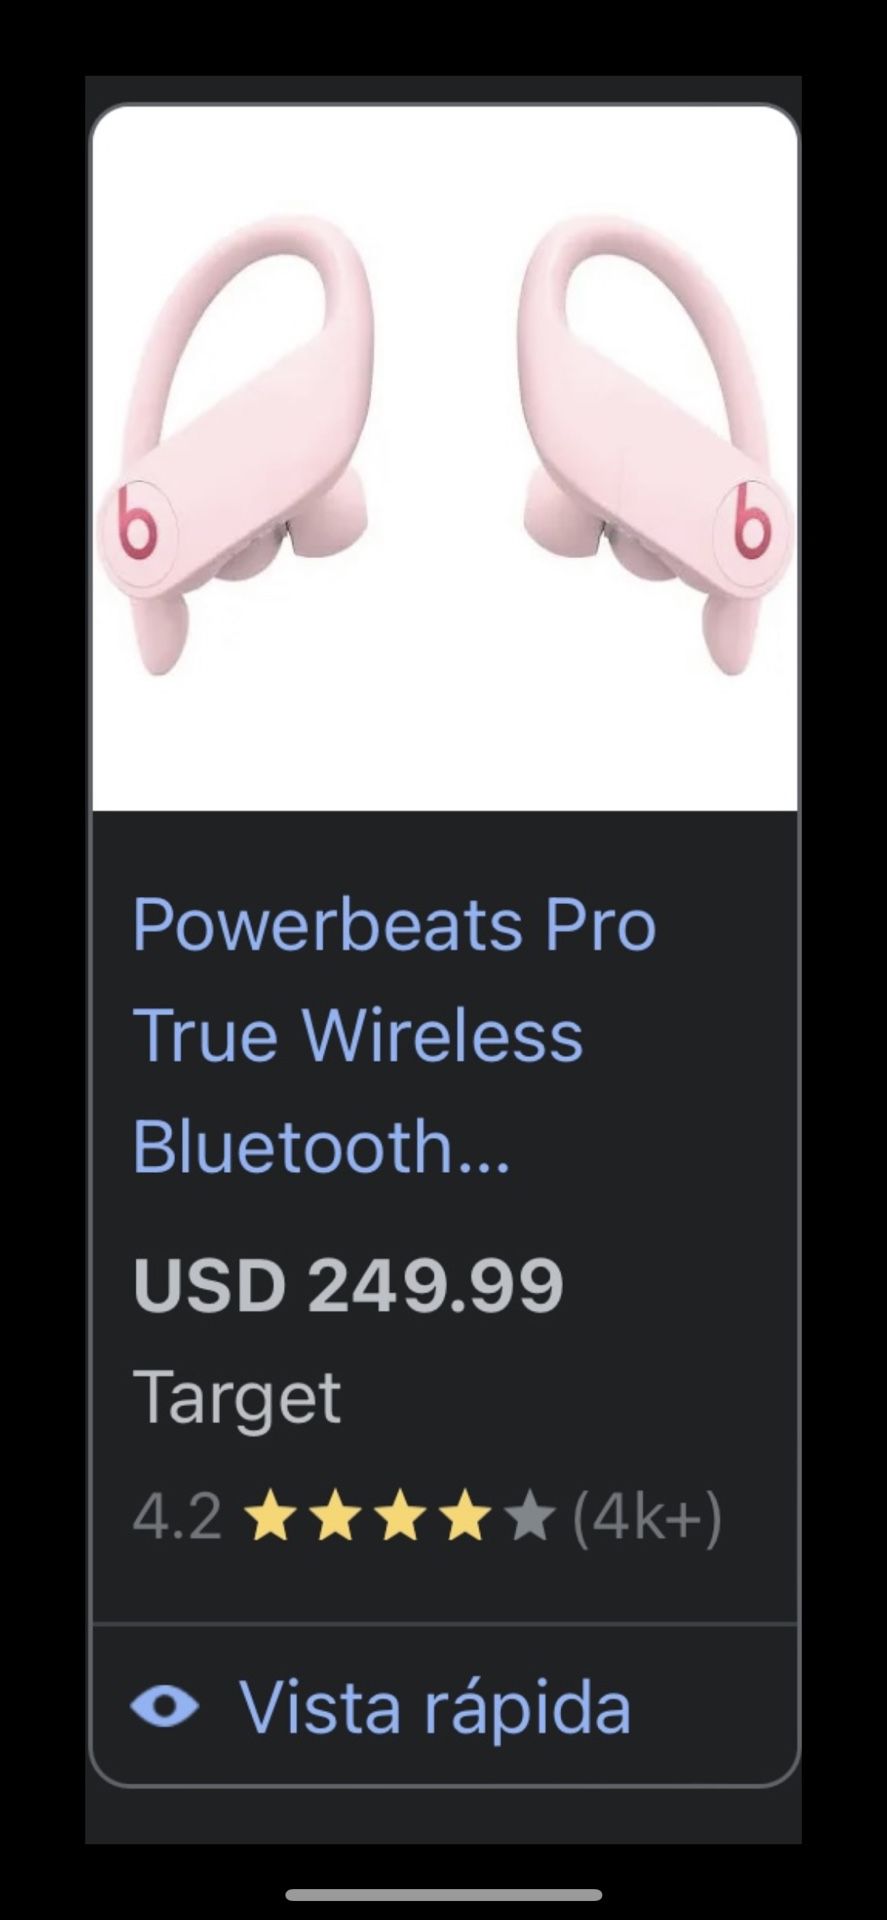 Semi new totally wireless Powerbeats Pro earphone with protective rubber case I accept offers normal store price is $249 .99